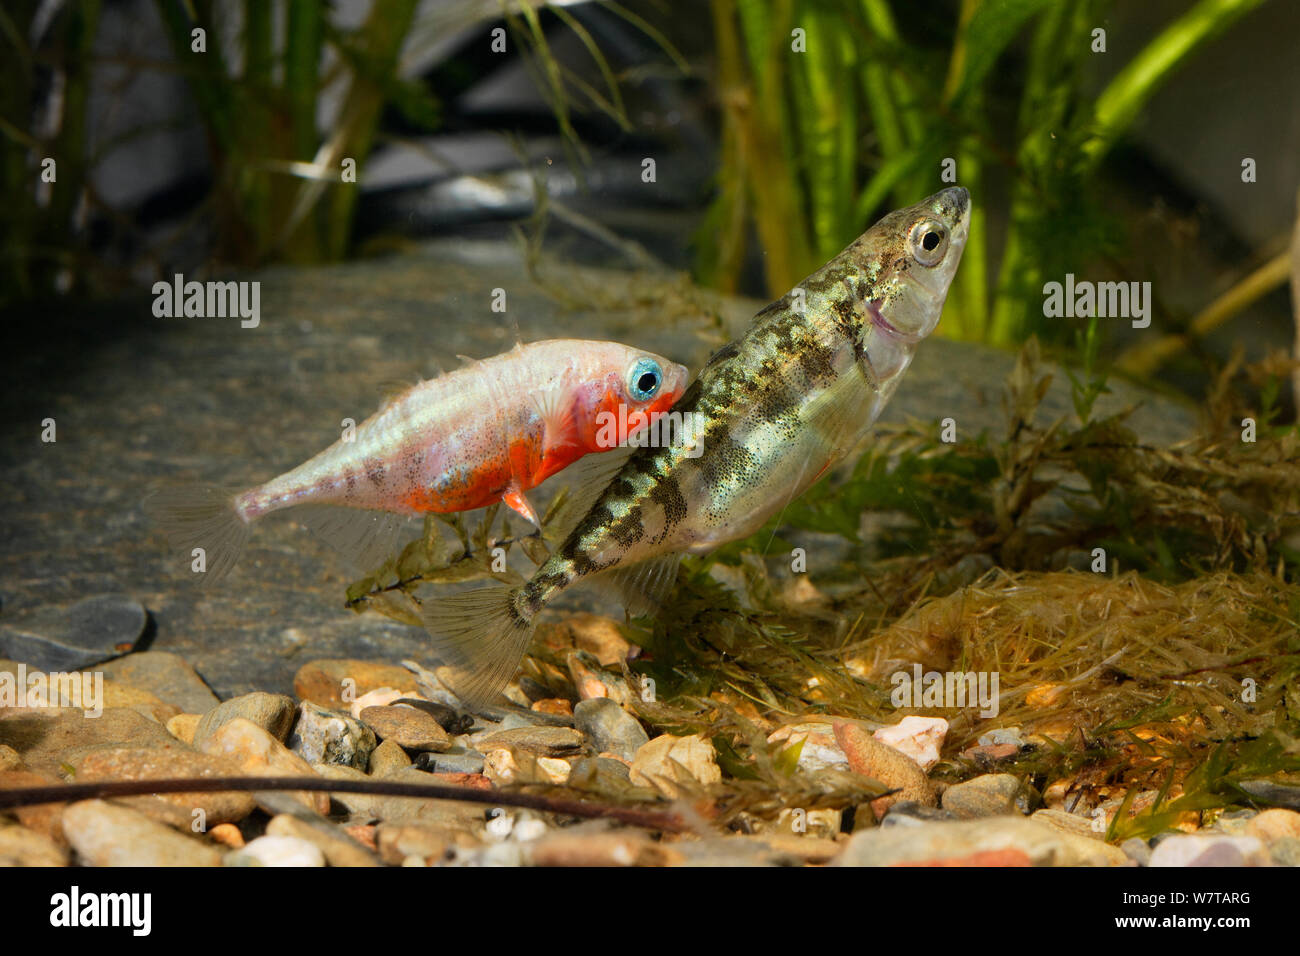 Three-spined stickleback (Gasterosteus aculeatus), male and female laying eggs in the nest, Espai Natural Les Gavarres, Baix Emporda, Catalonia, Spain, captive. Stock Photo